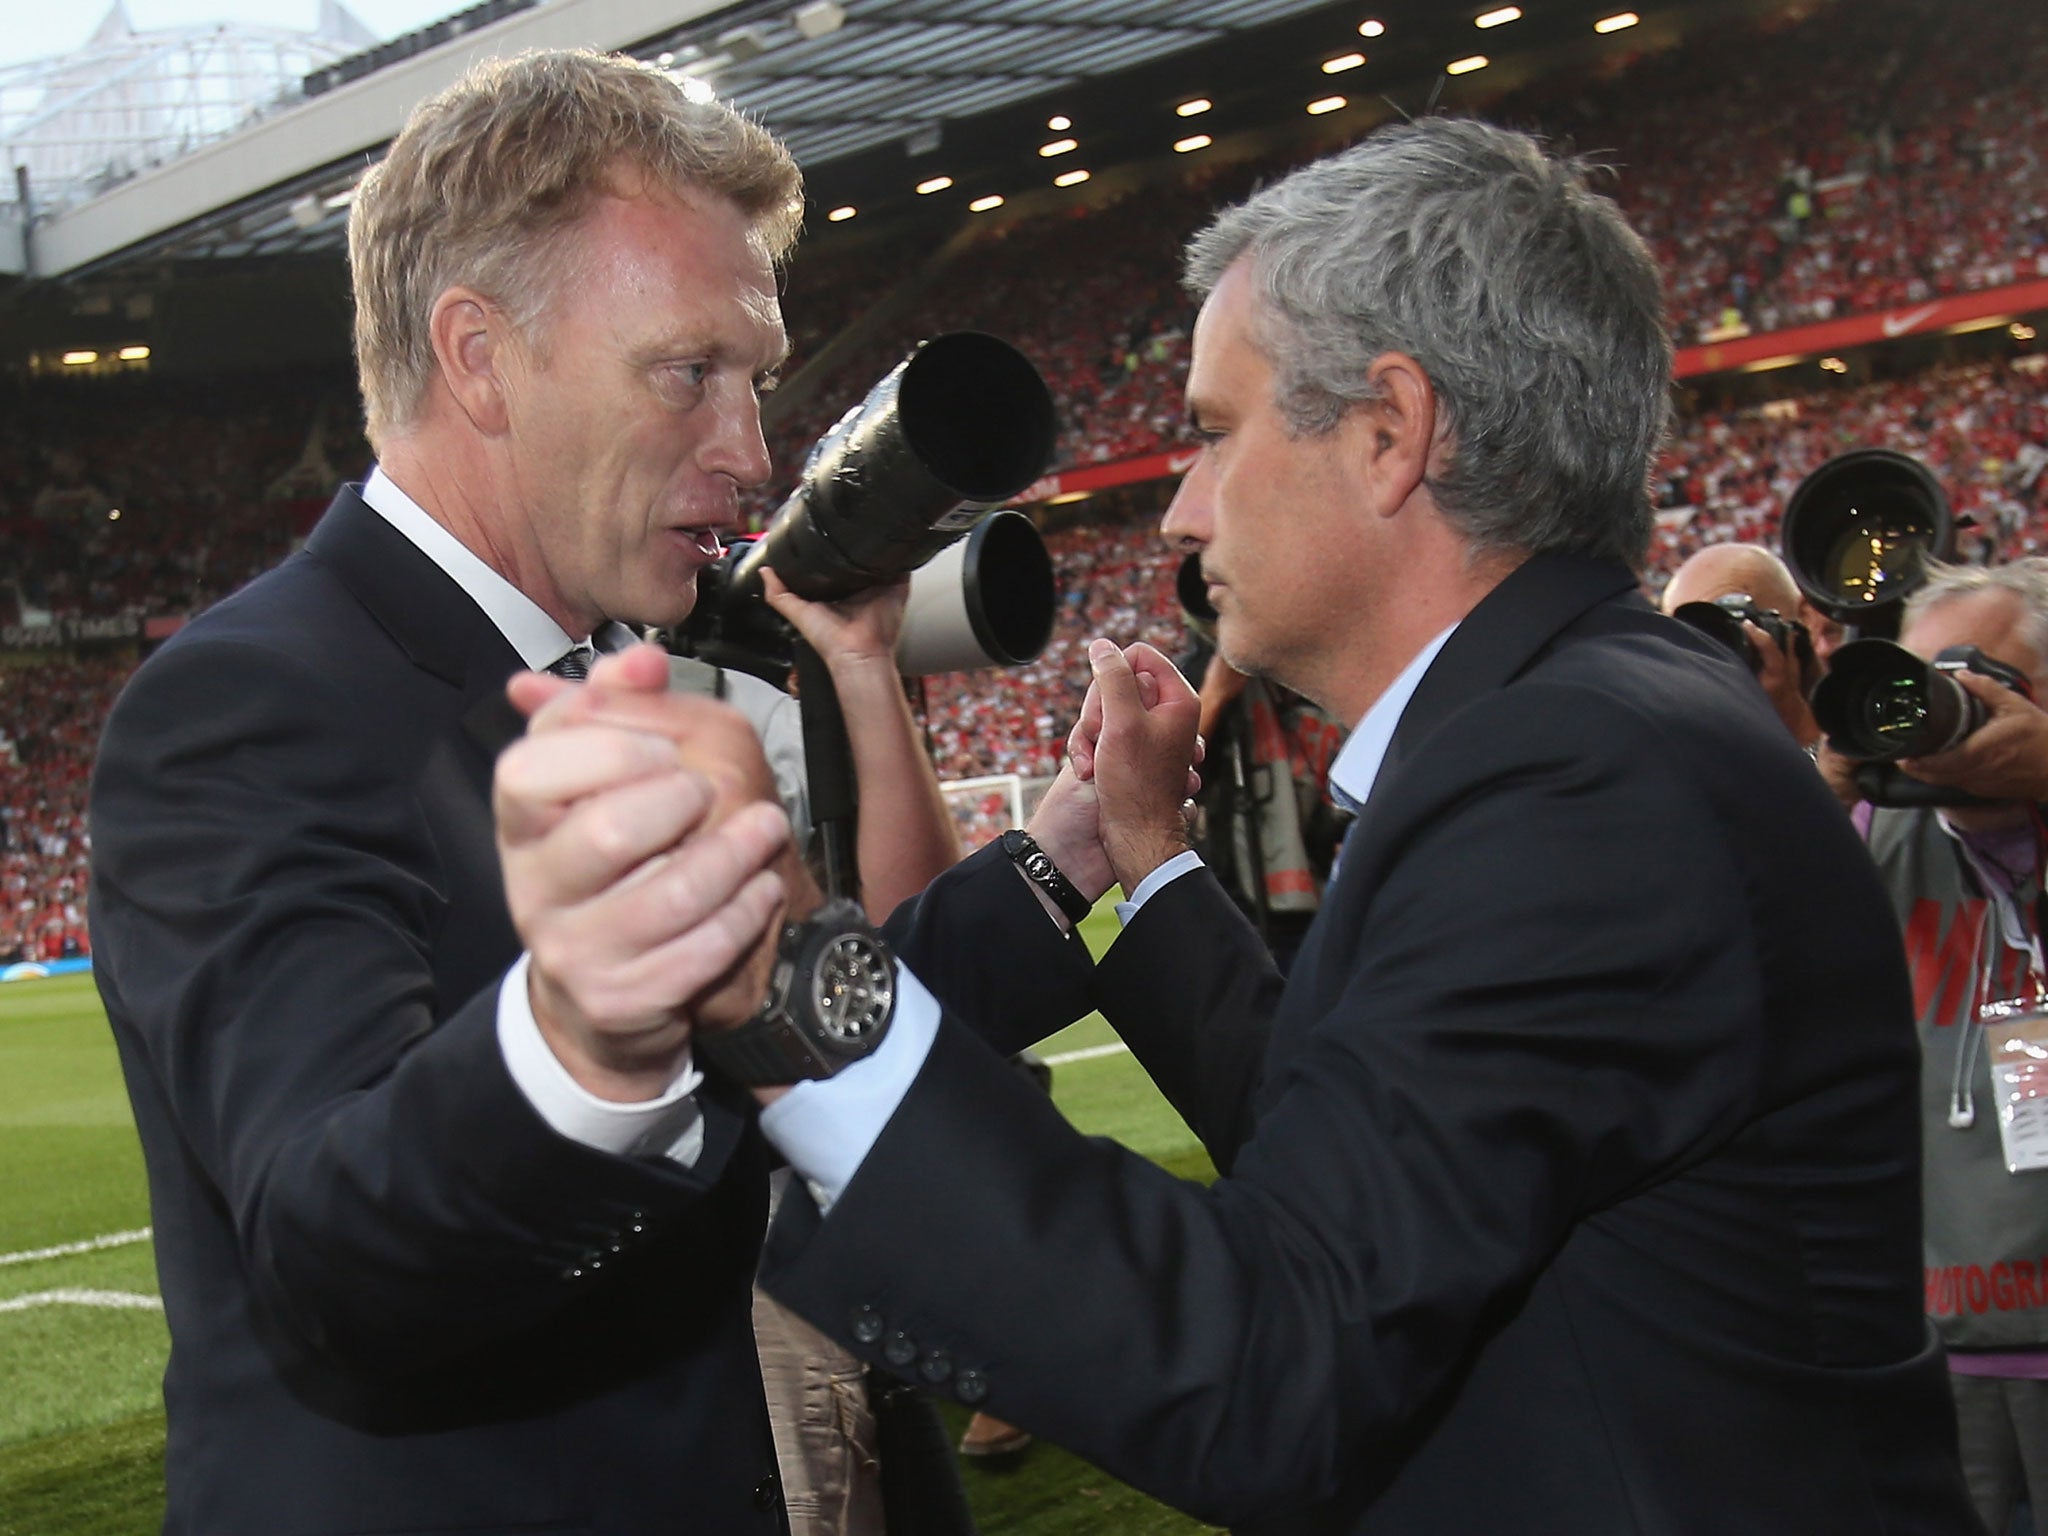 David Moyes and Jose Mourinho shake hands ahead of the goalless draw between Manchester United and Chelsea at Old Trafford in August 2013